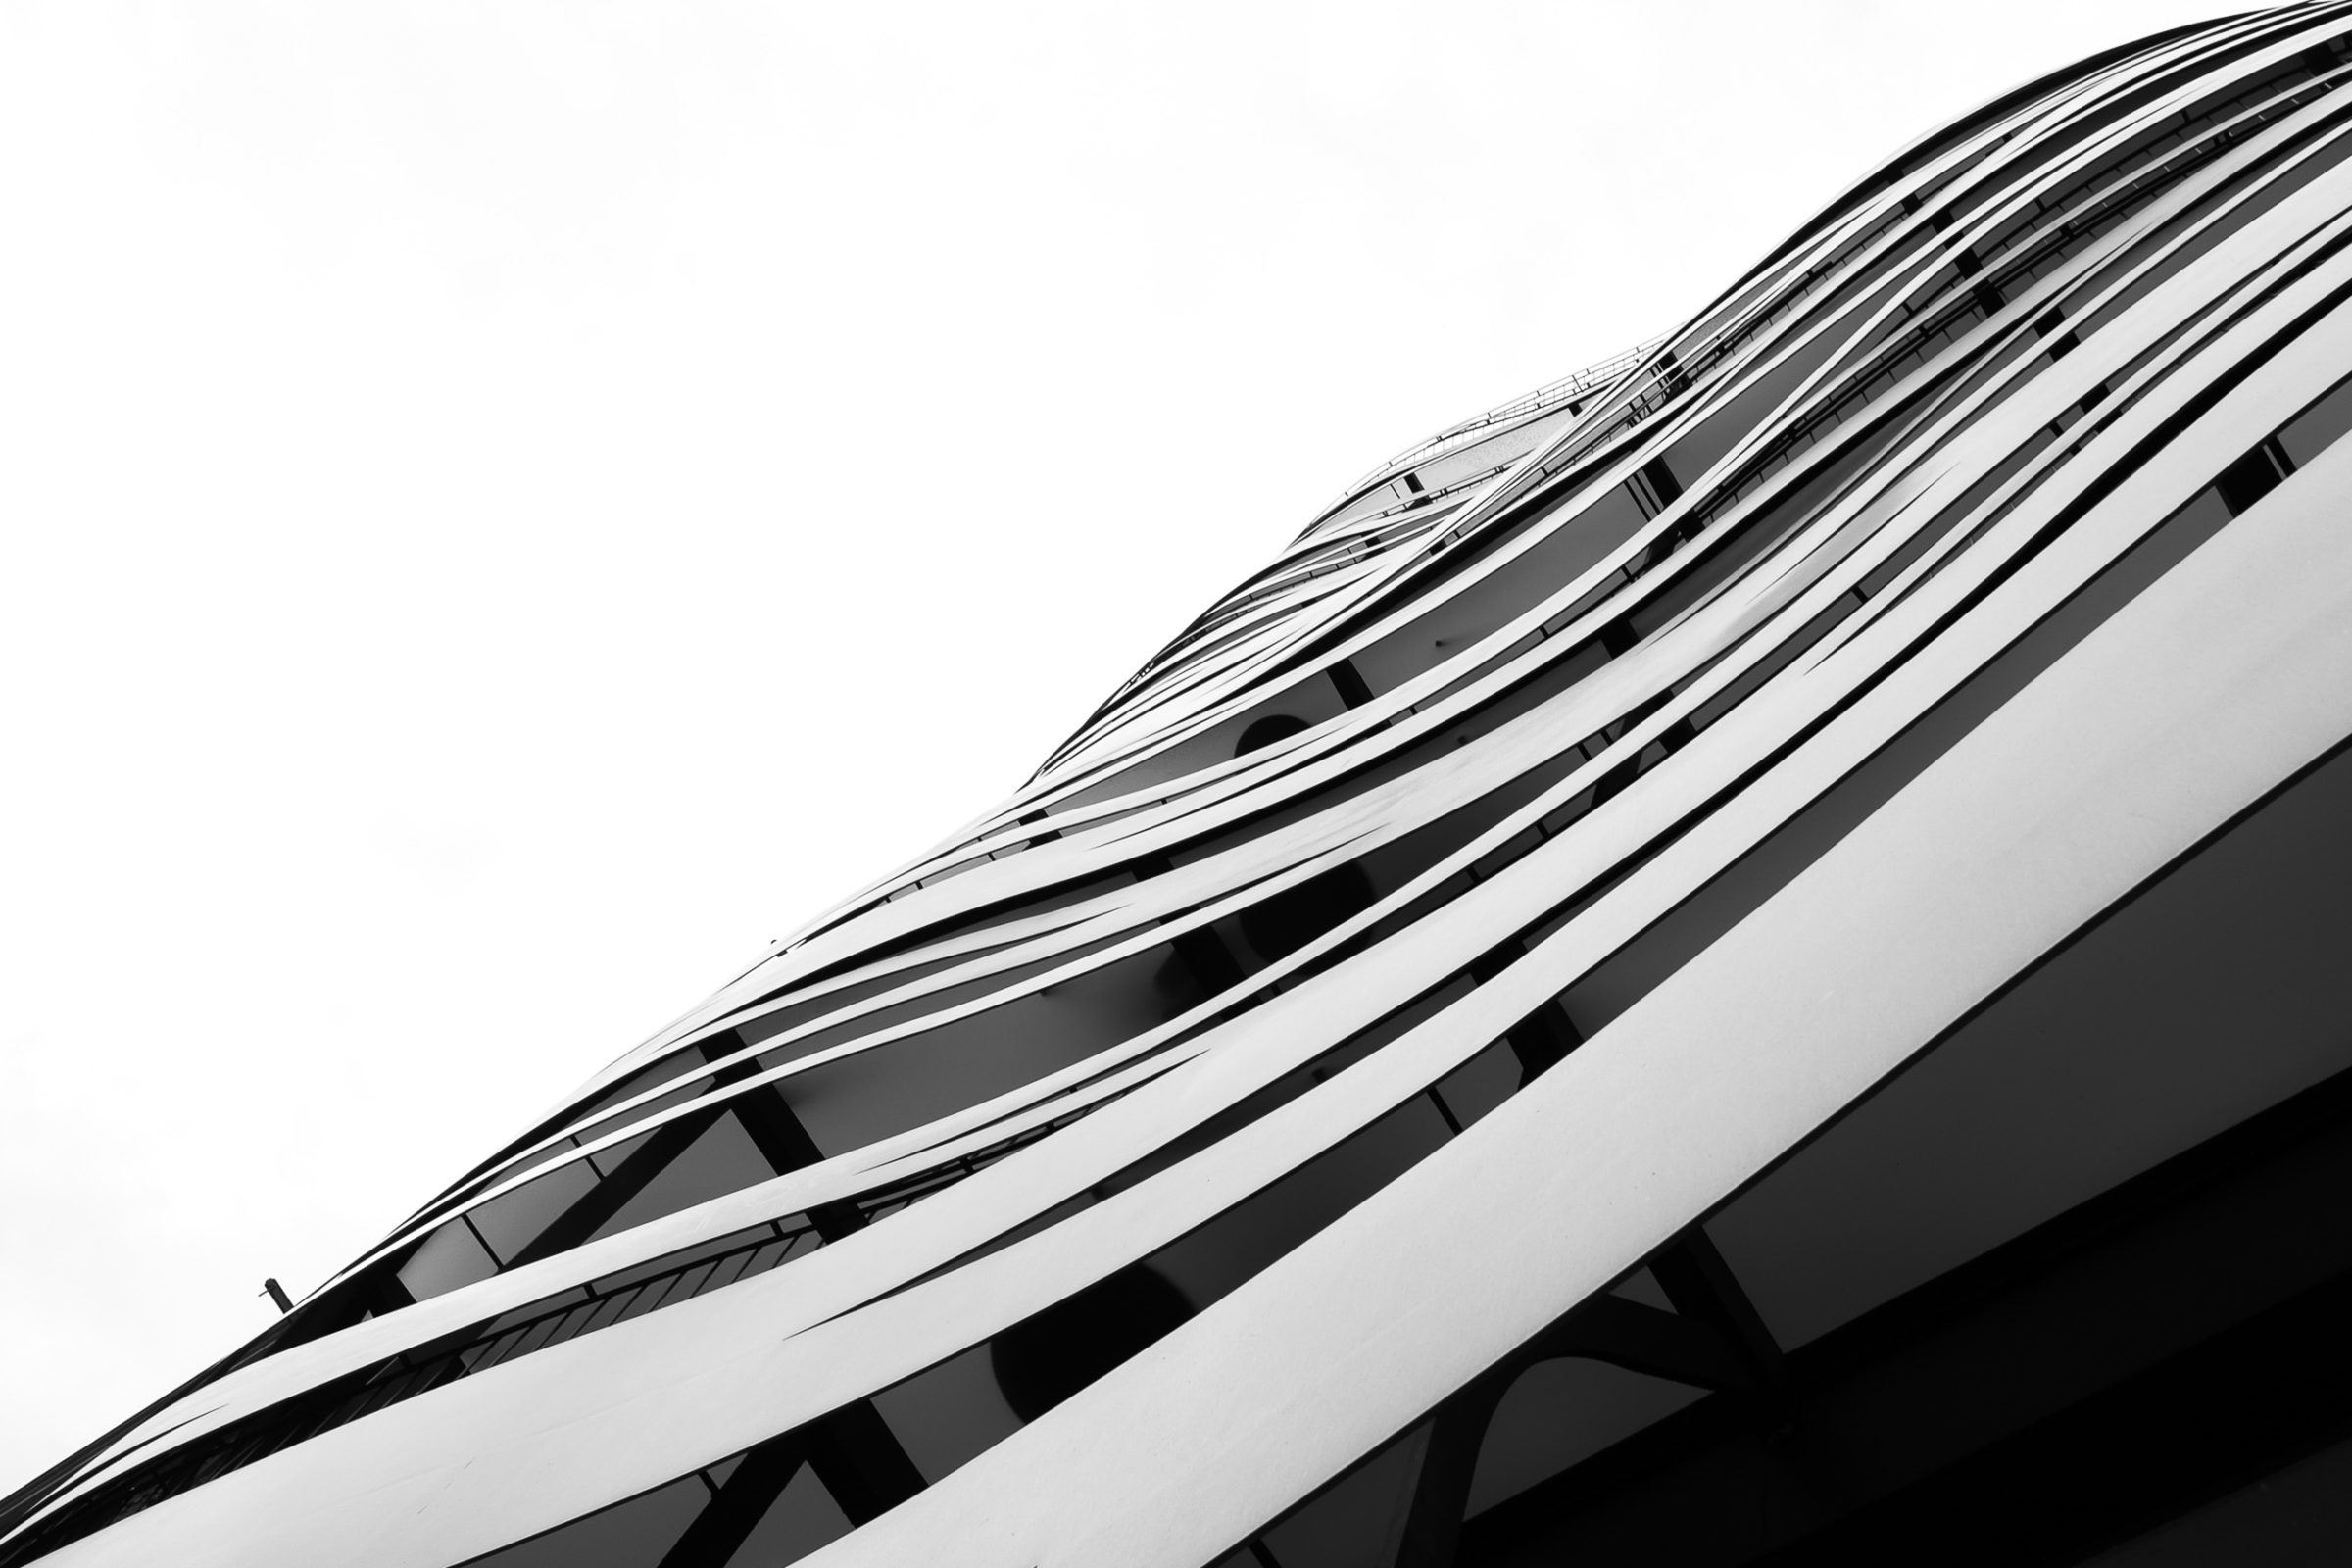 Architecture - Olivier Gisiger Photographies